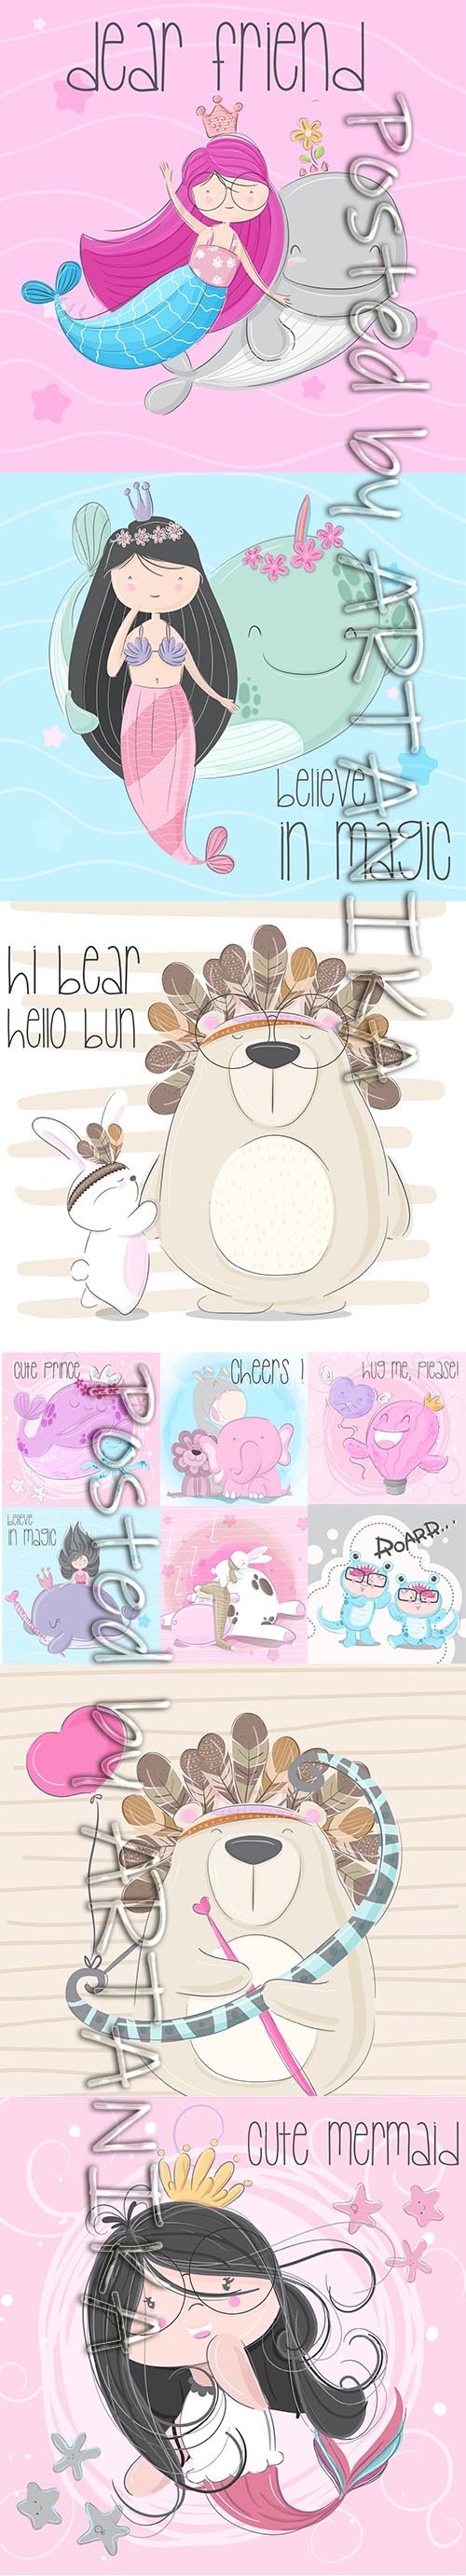 Cute Little Animals and Child Illustrations Set Vol 9